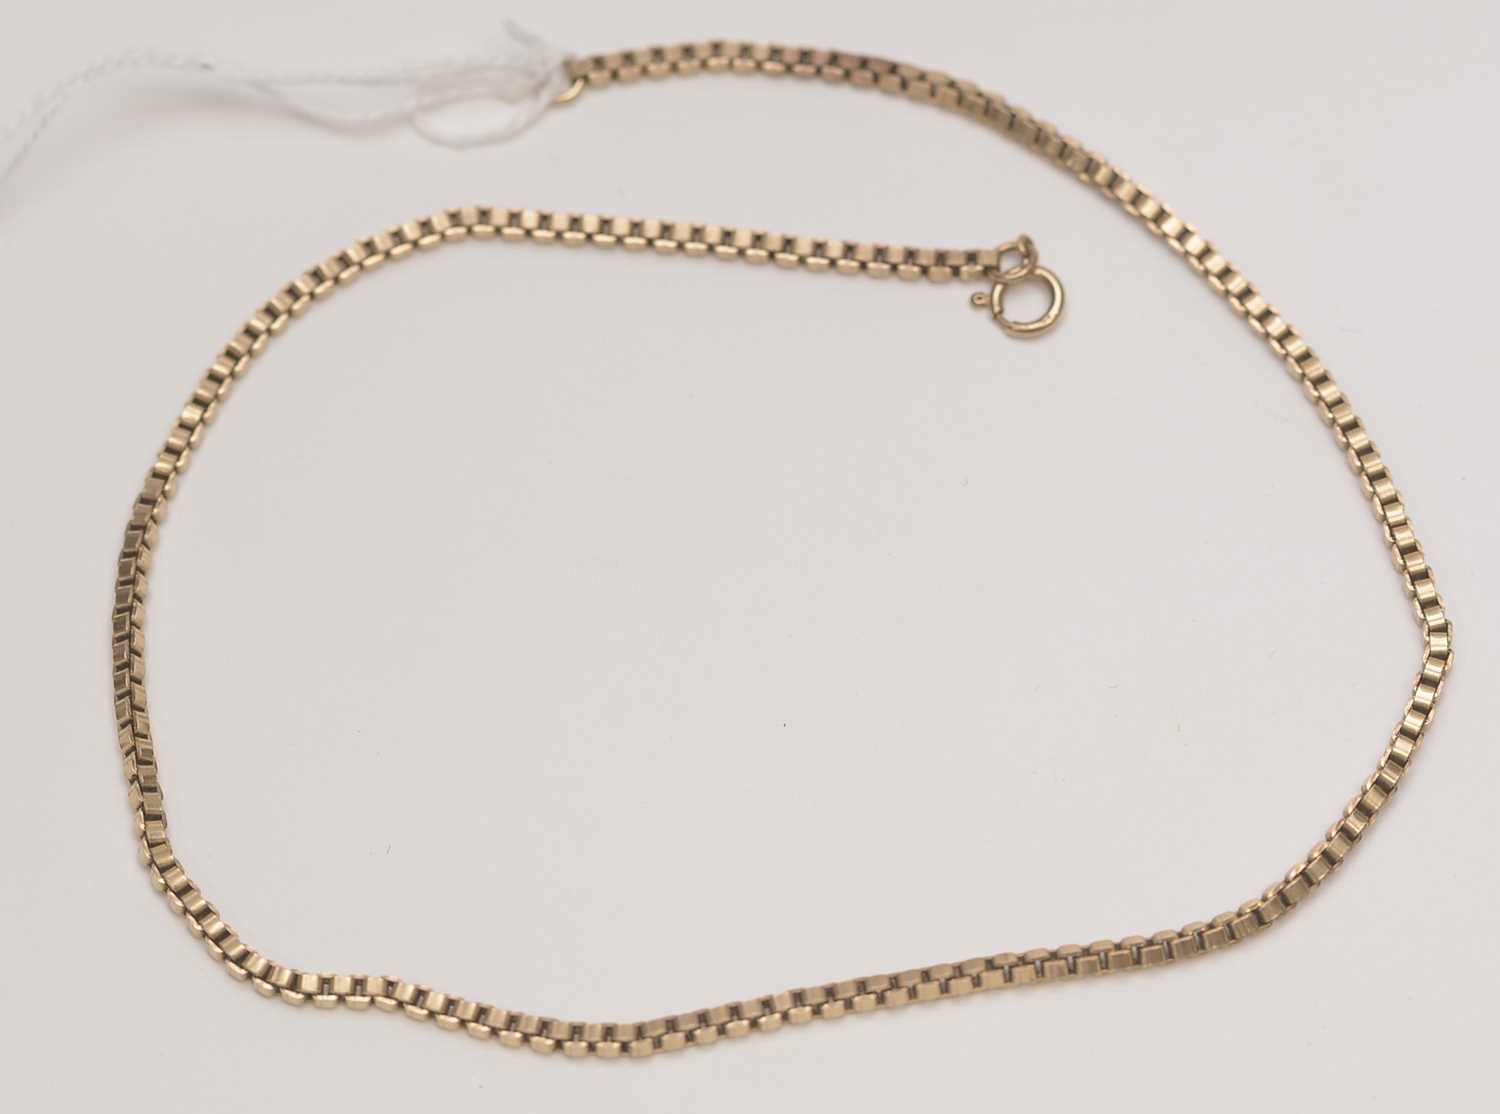 Lot 222 - 9ct. yellow gold box link pattern necklace chain.